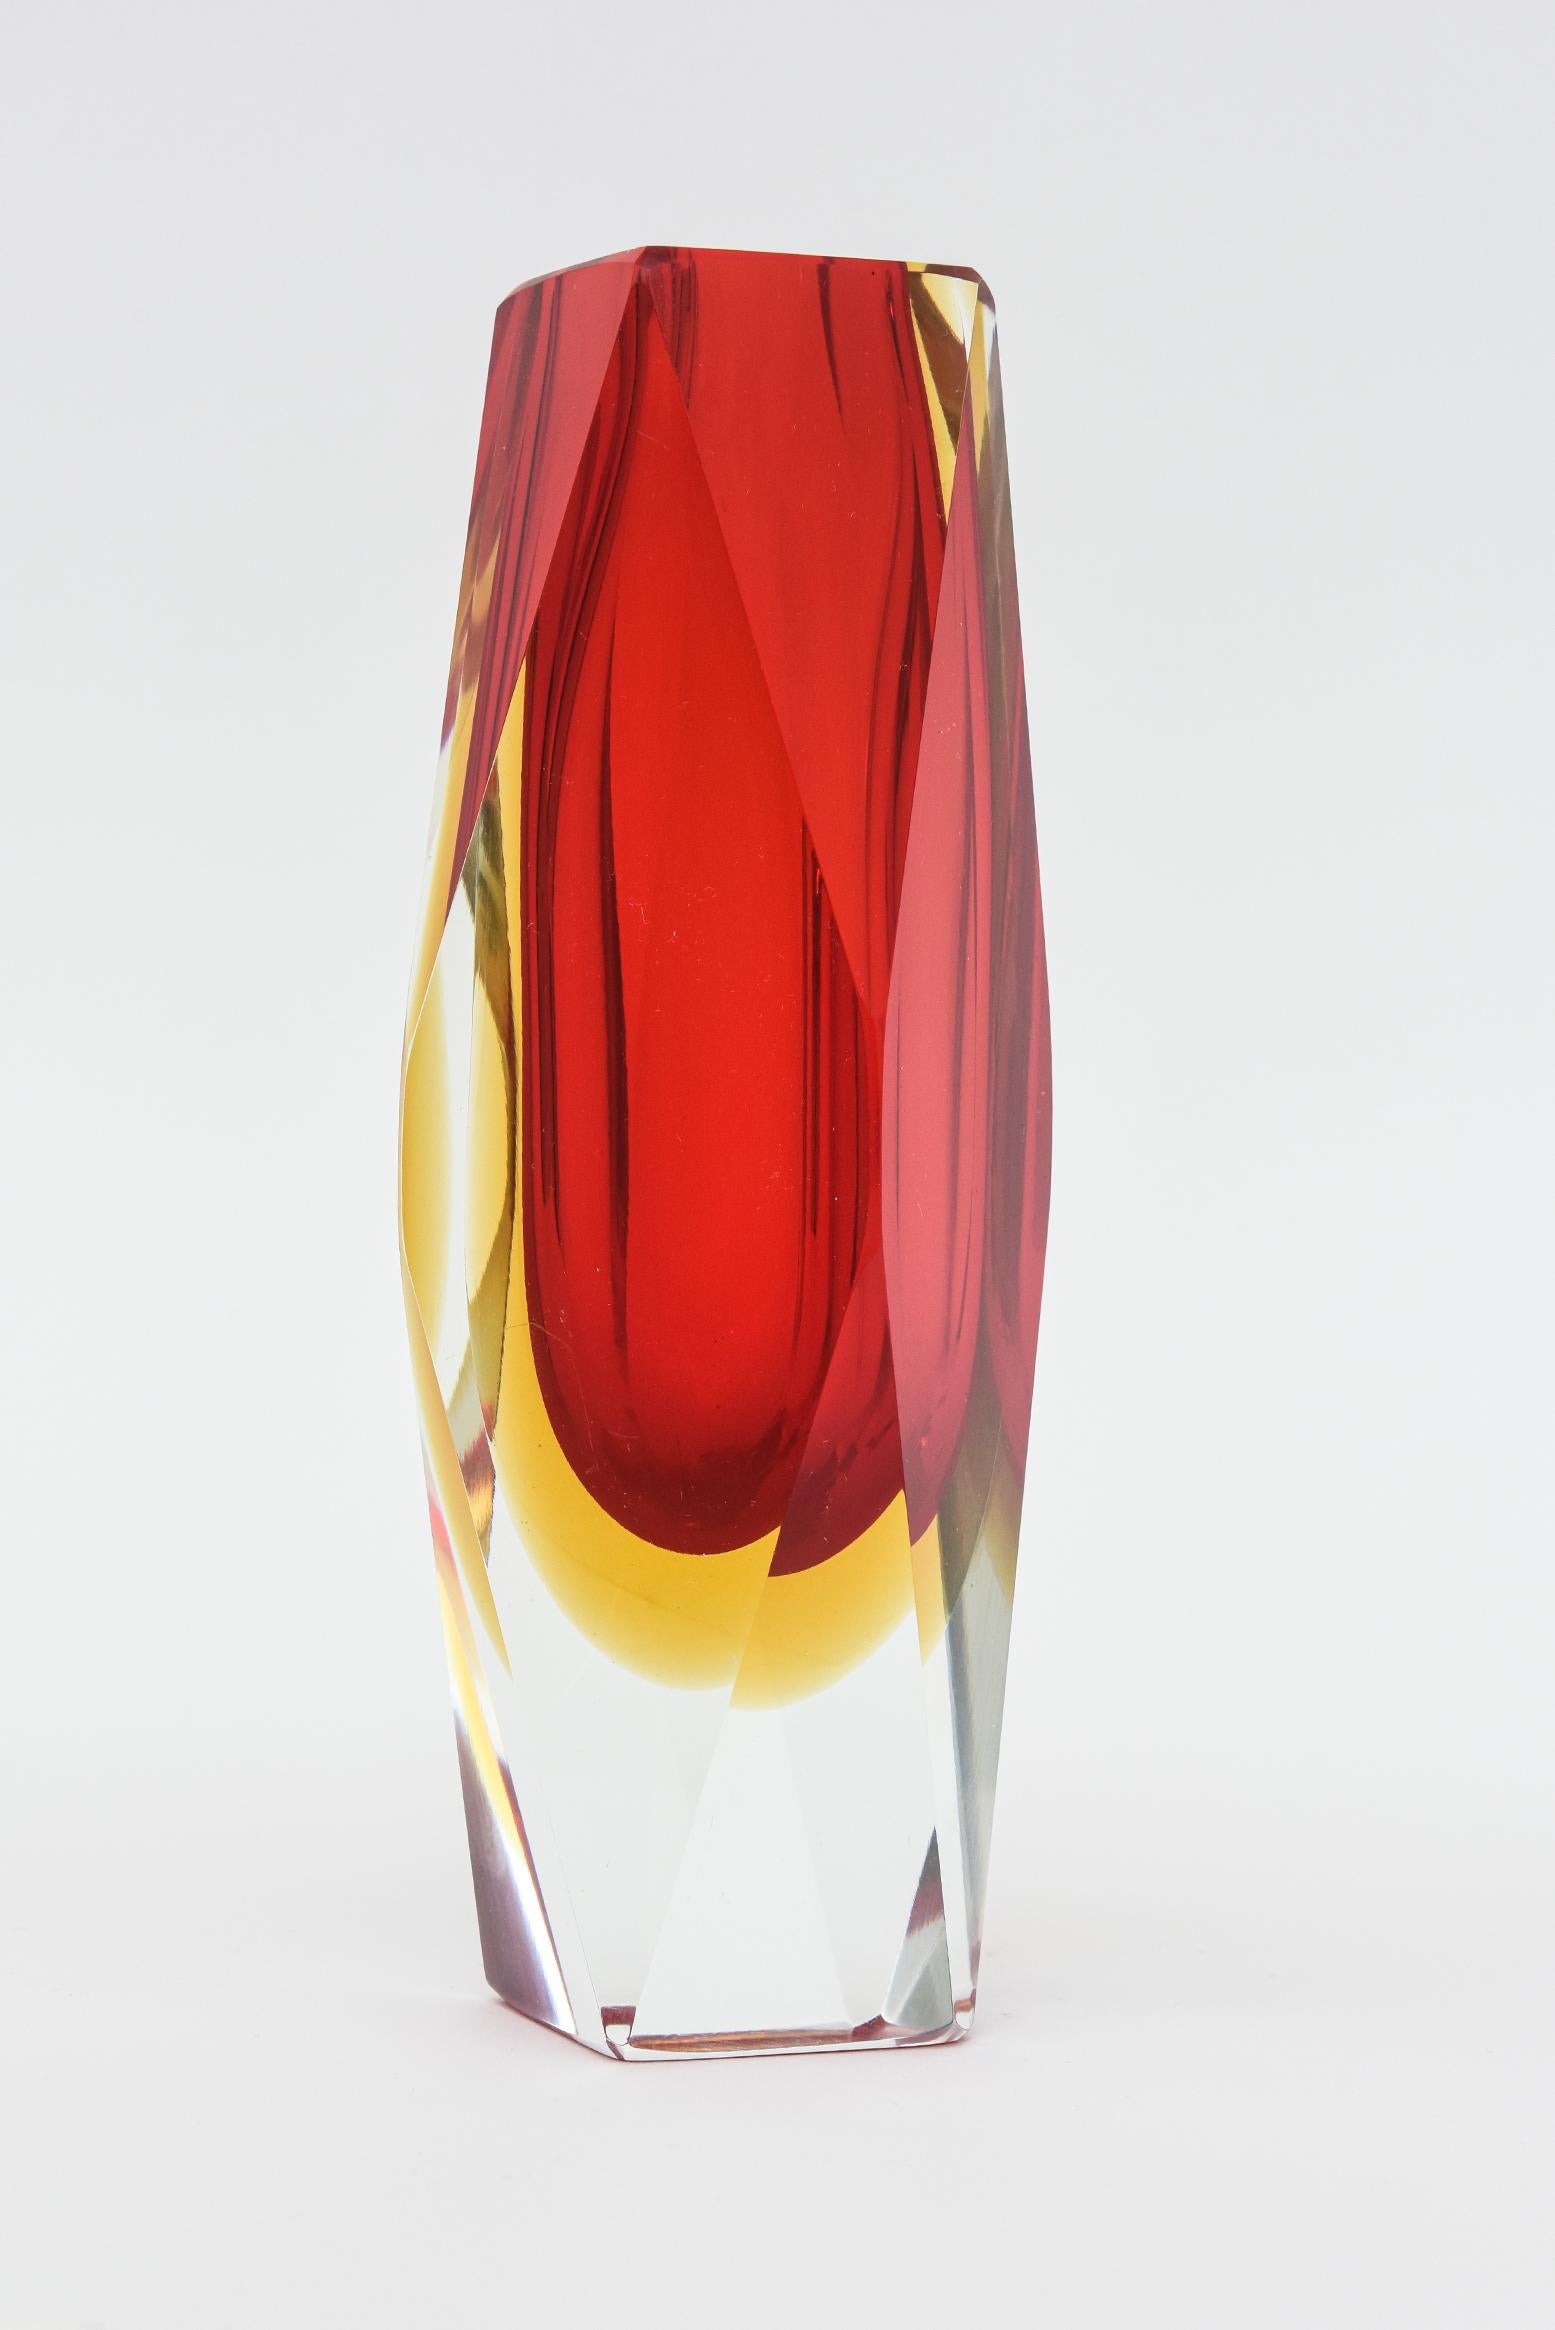 This beautiful vintage Murano glass vase by Alessandro Mandruzzato is in the Sommerso layering of faceted glass in red and yellow with a clear base. Italian, hand blown and from the 70's. These are vibrant colors to offset beautiful flowers. It